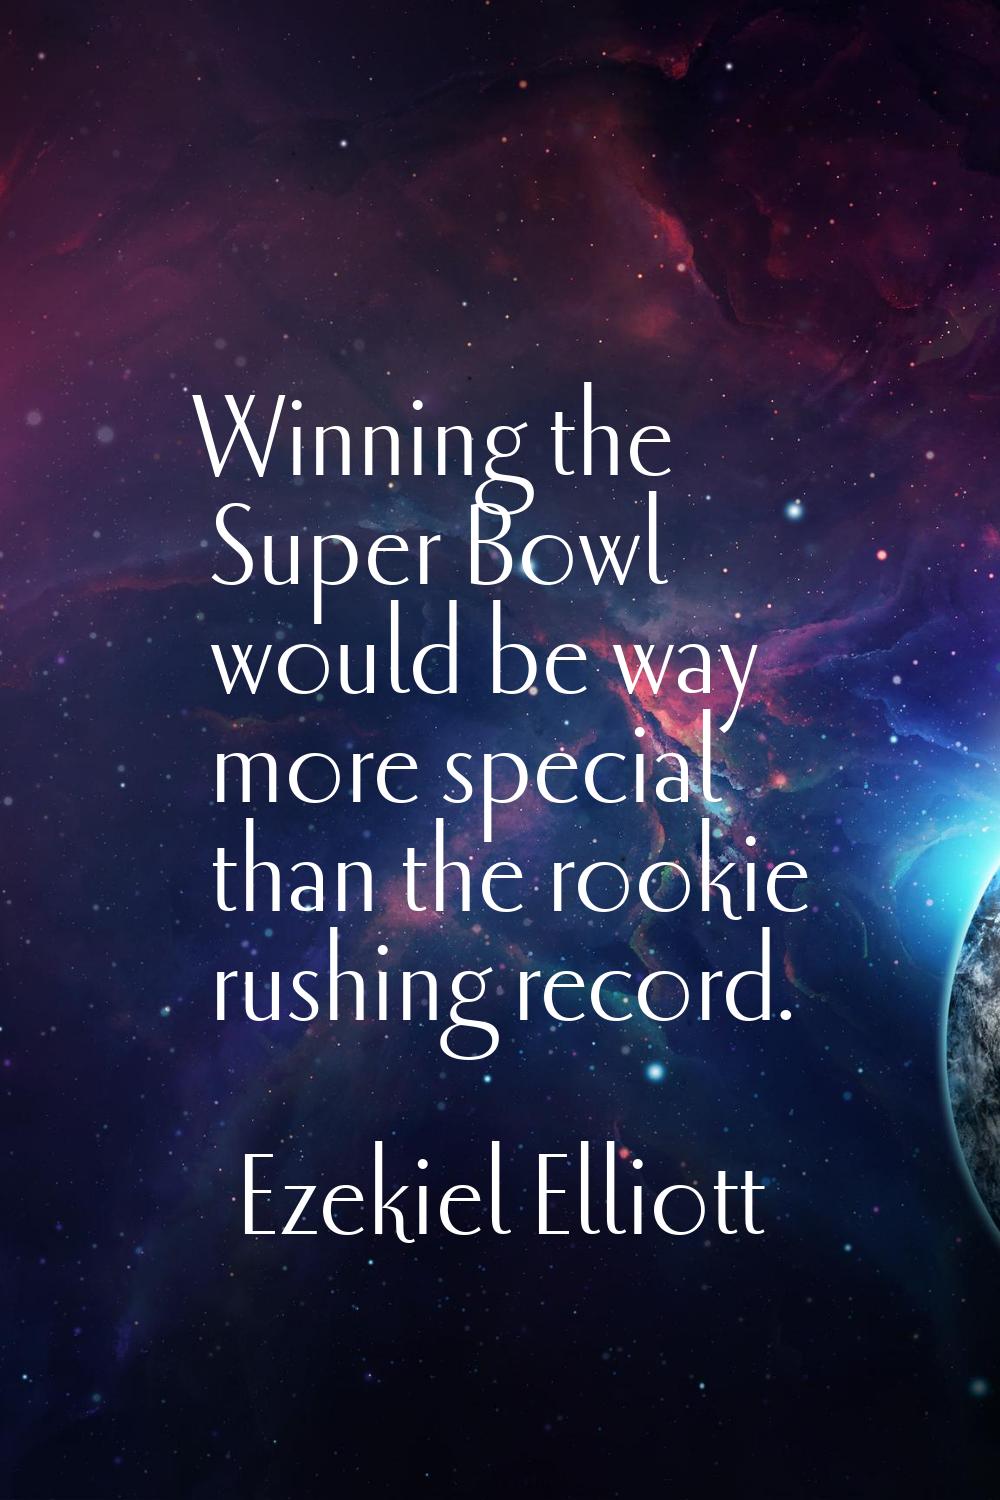 Winning the Super Bowl would be way more special than the rookie rushing record.